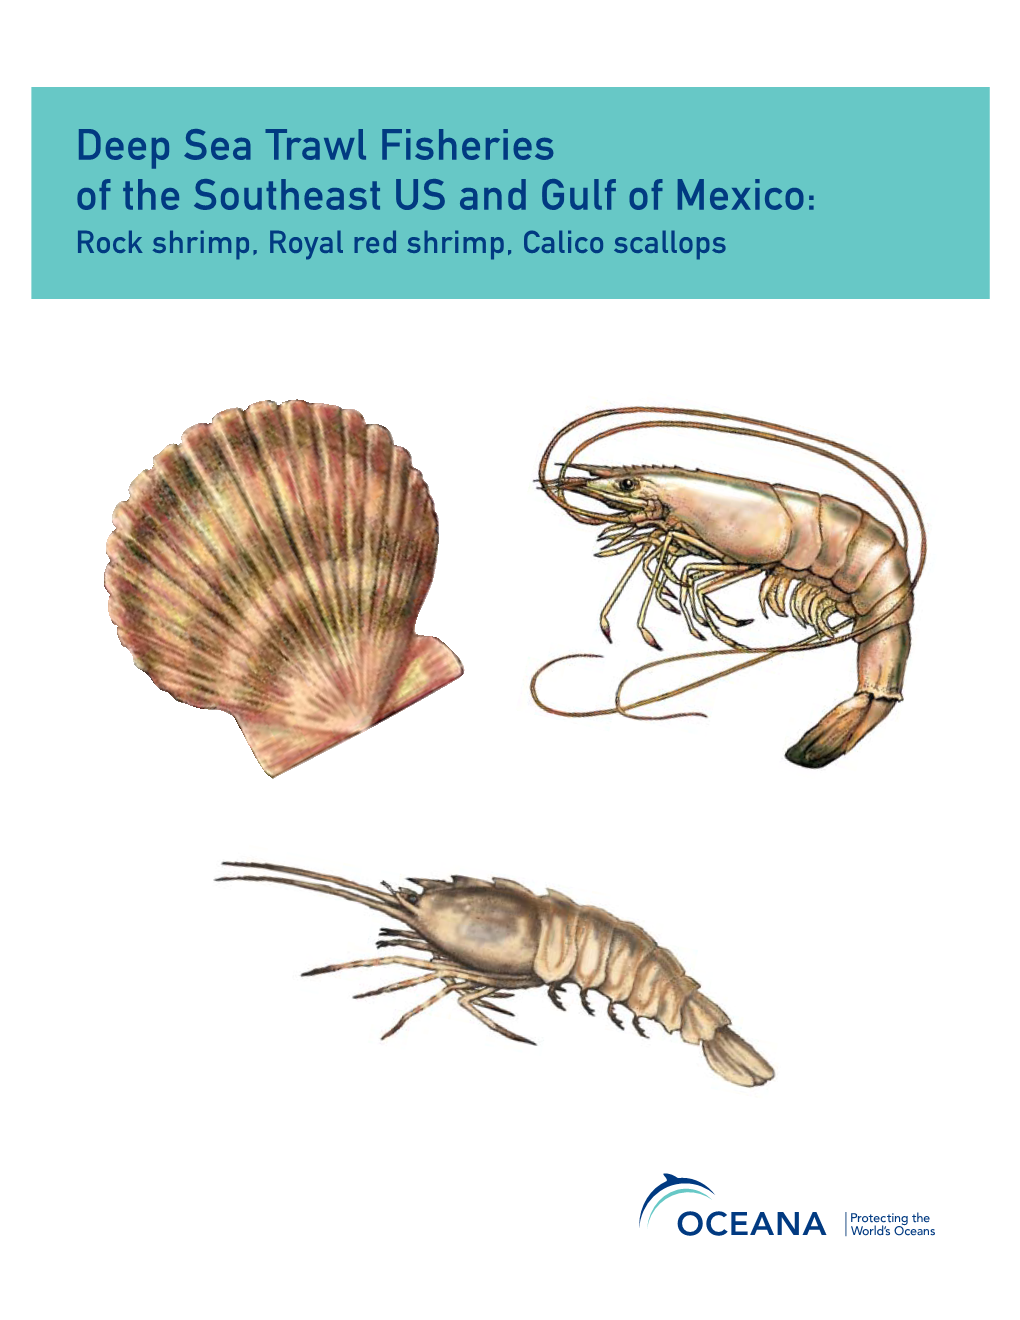 Deep Sea Trawl Fisheries of the Southeast US and Gulf of Mexico: Rock Shrimp, Royal Red Shrimp, Calico Scallops © OCEANA | May 2007